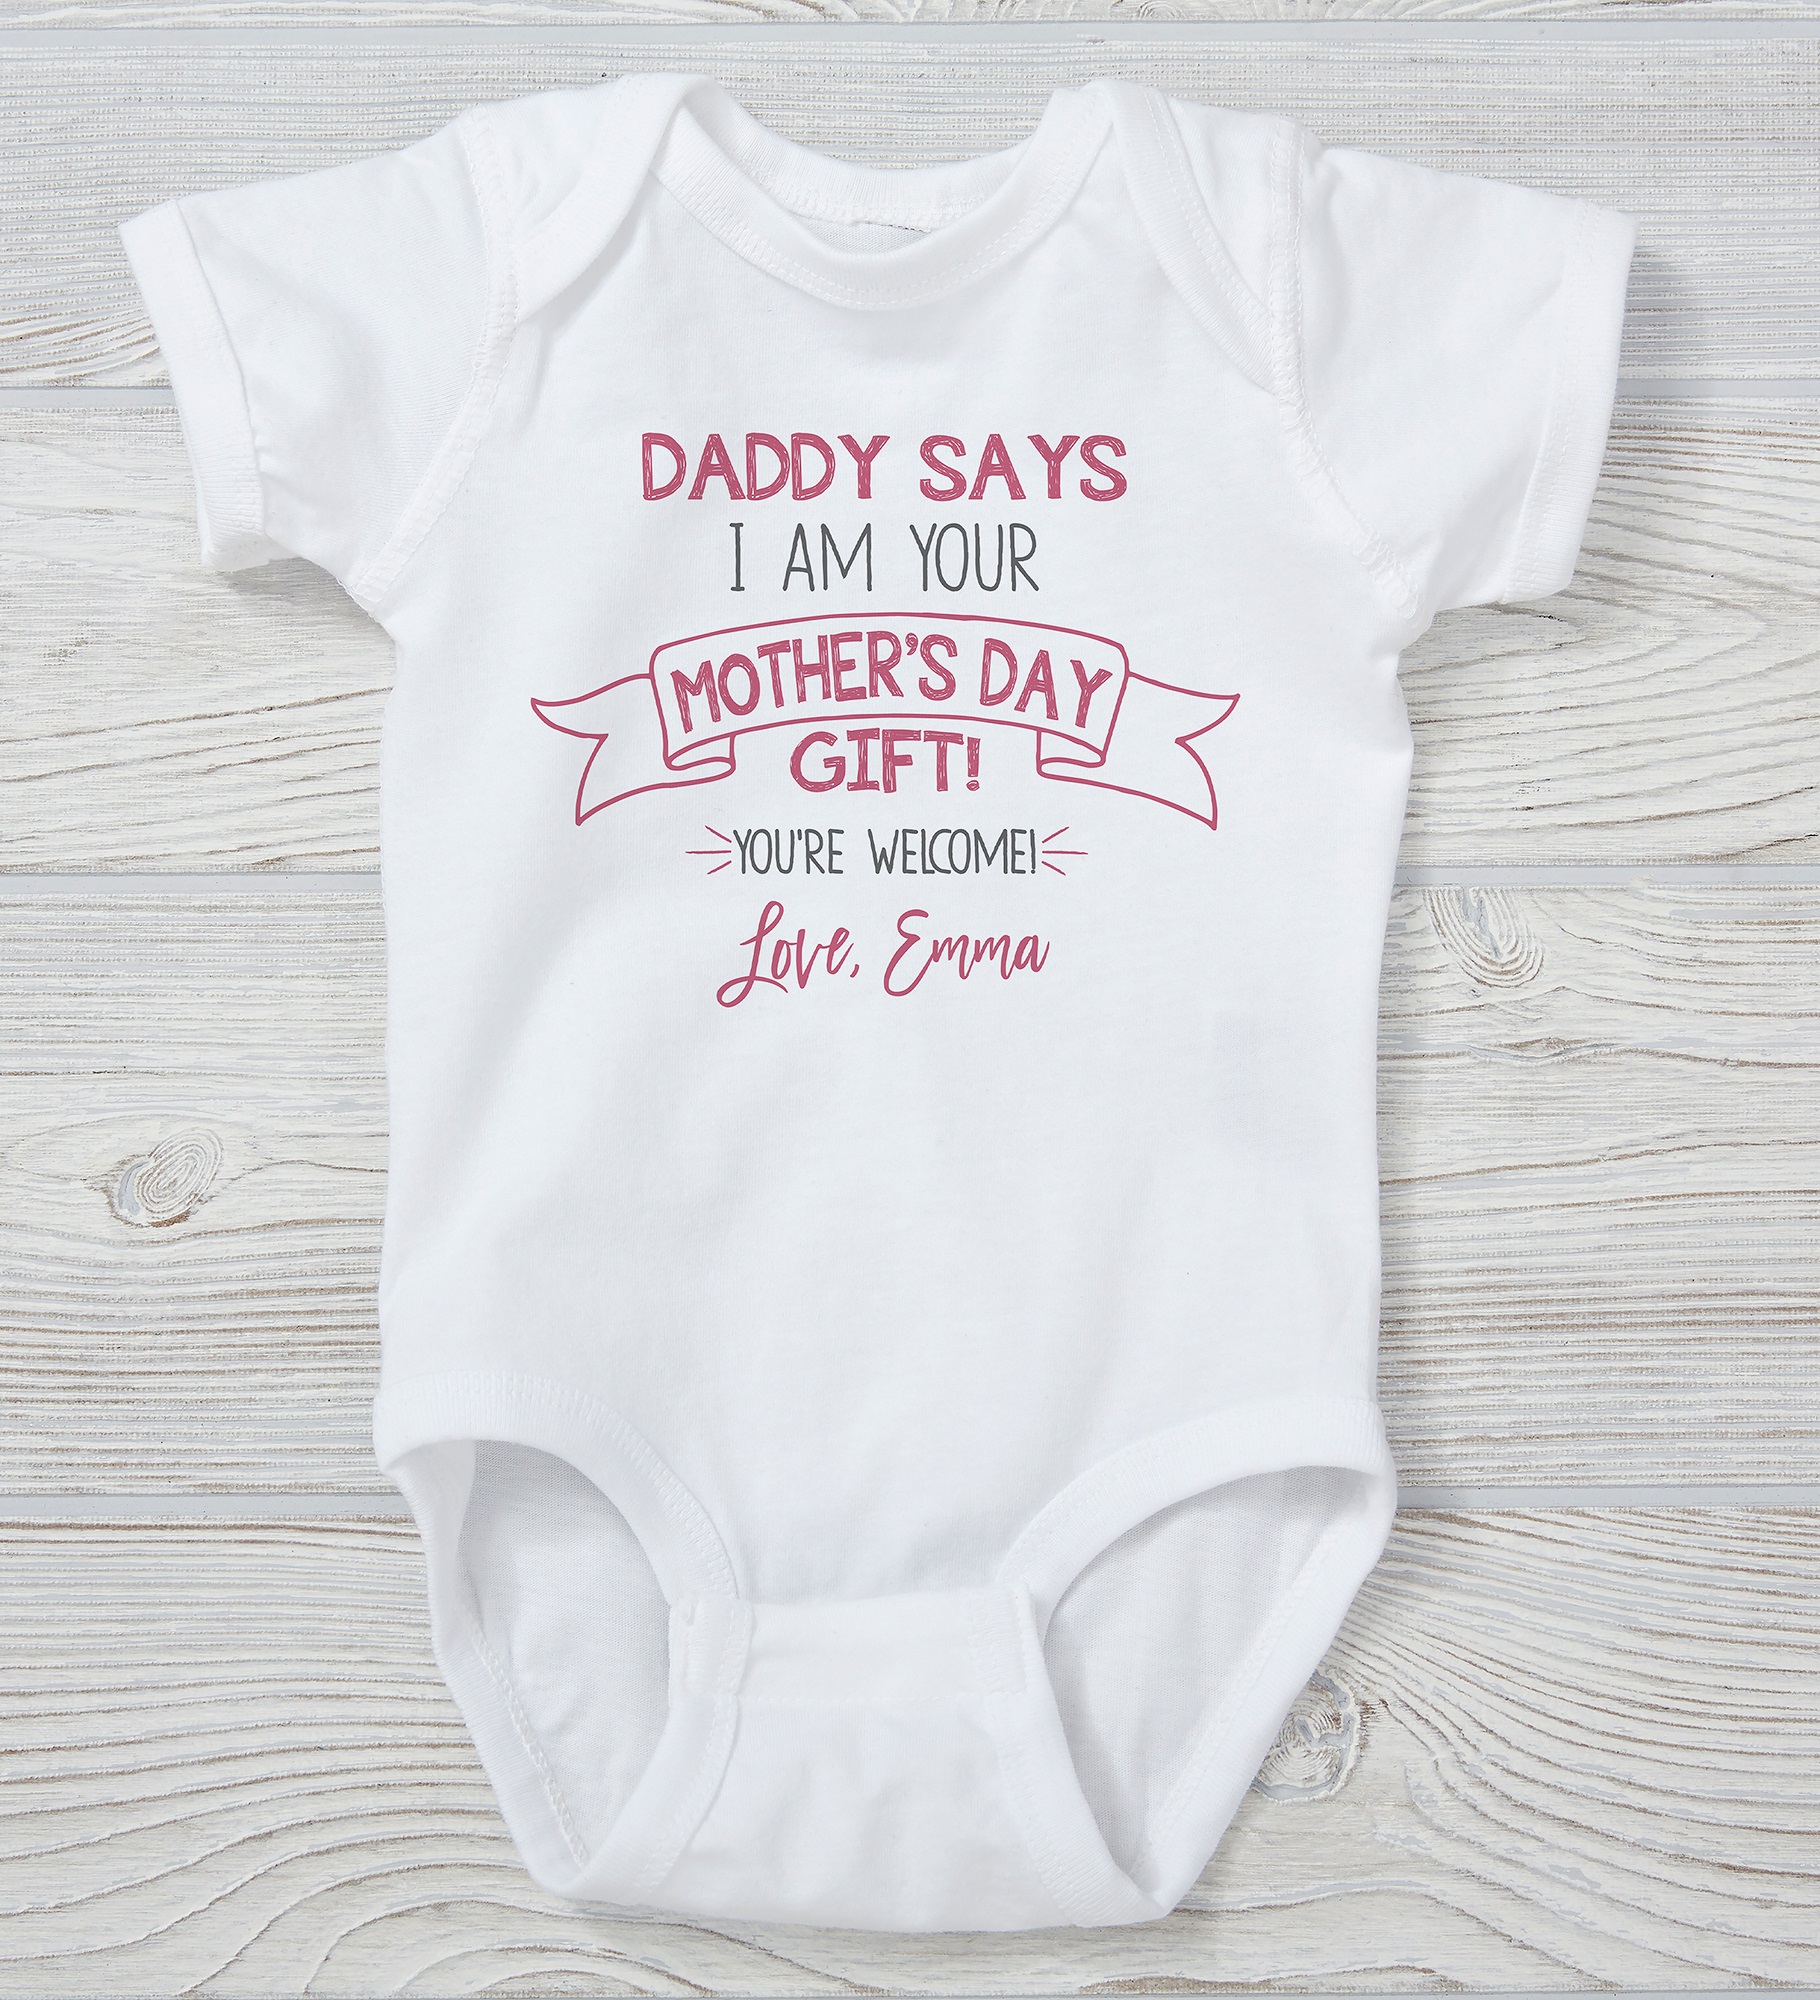 Dad Says I'm Your Mother's Day Present Personalized Baby Clothing